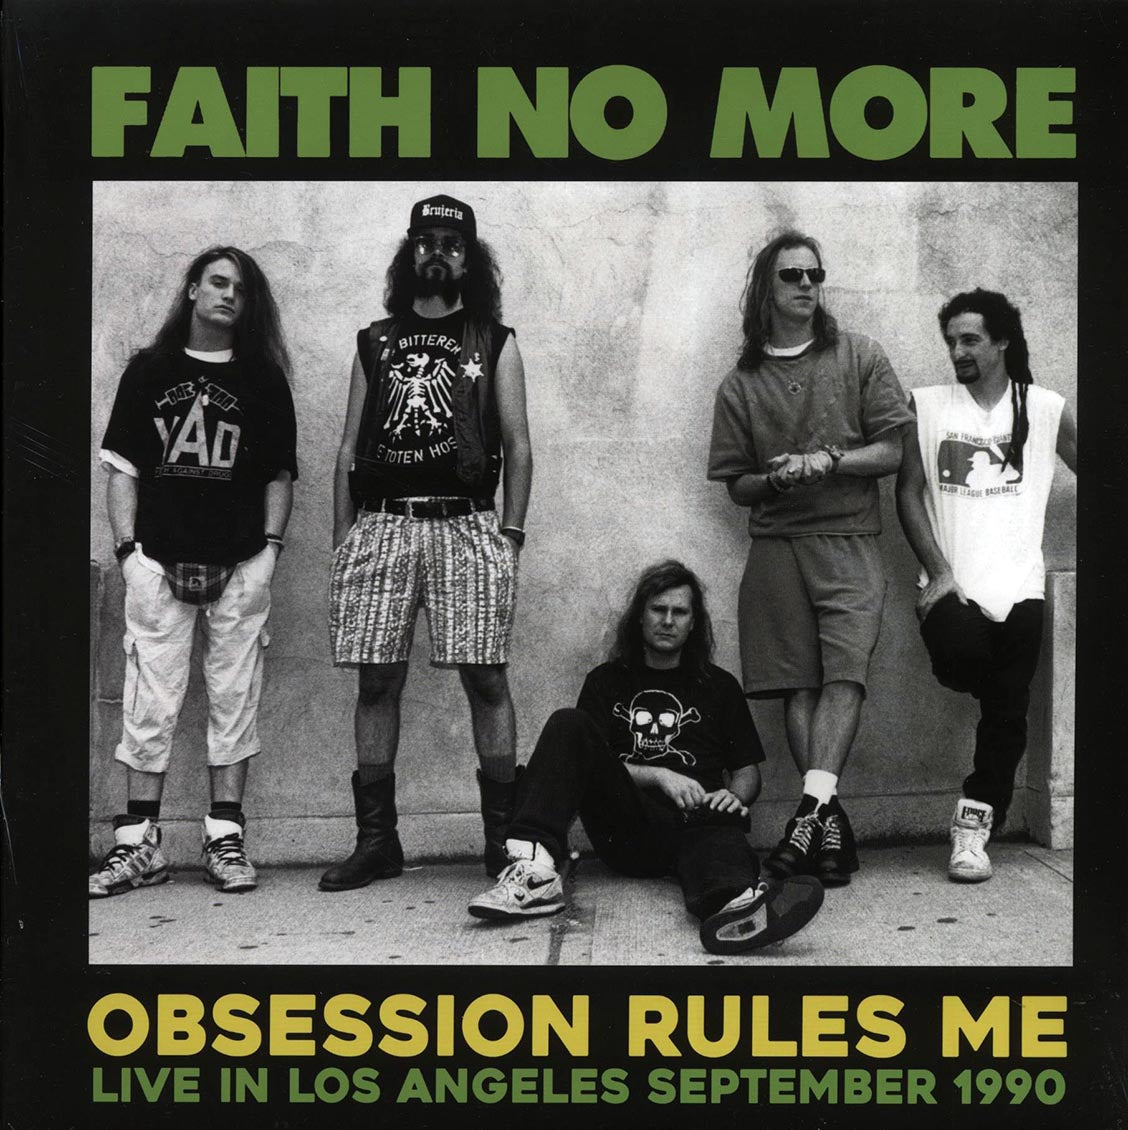 Faith No More	"Obsession Rules Me: Live In Los Angeles, September 1990" LP